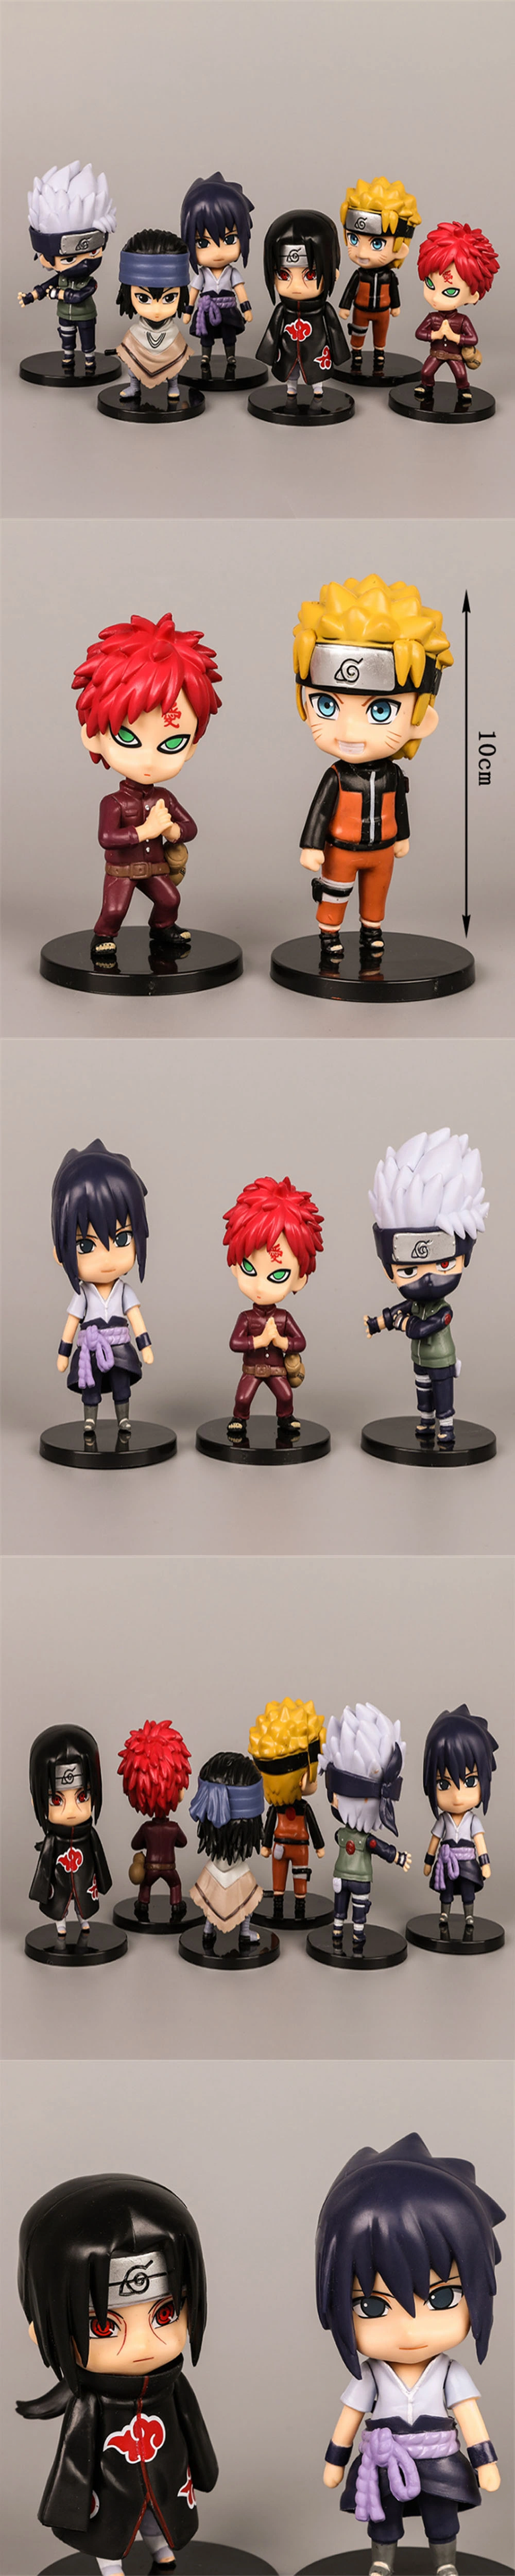 Naruto Figure Model Toy Kids Toys Action Figure